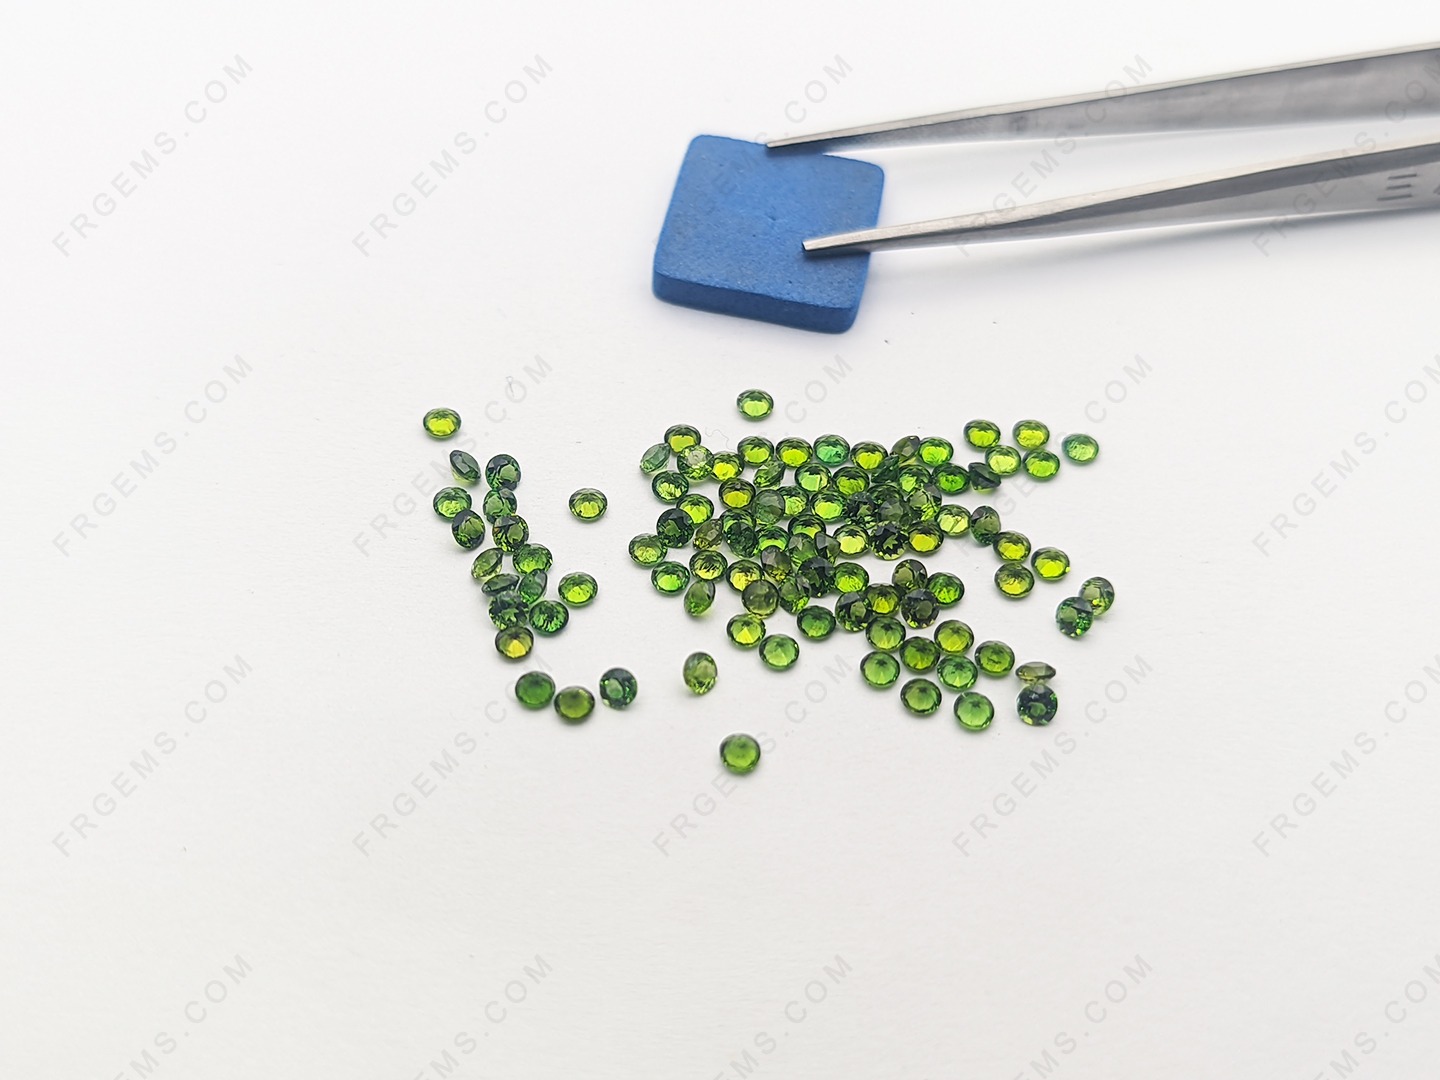 Wholesale Loose Natural genuine Green Tourmaline Color Round faceted melee Gemstones China